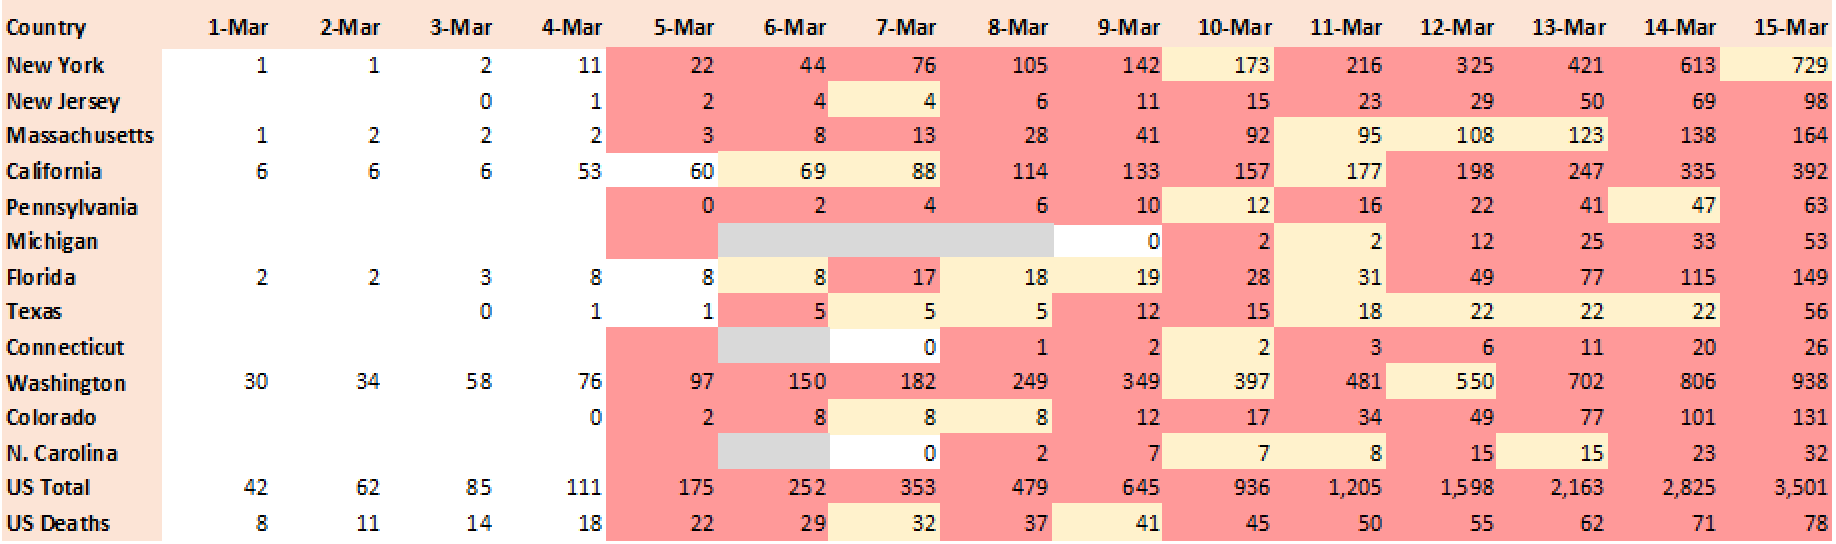 Actual cases period 01-Mar-2020 to 15-Mar-2020